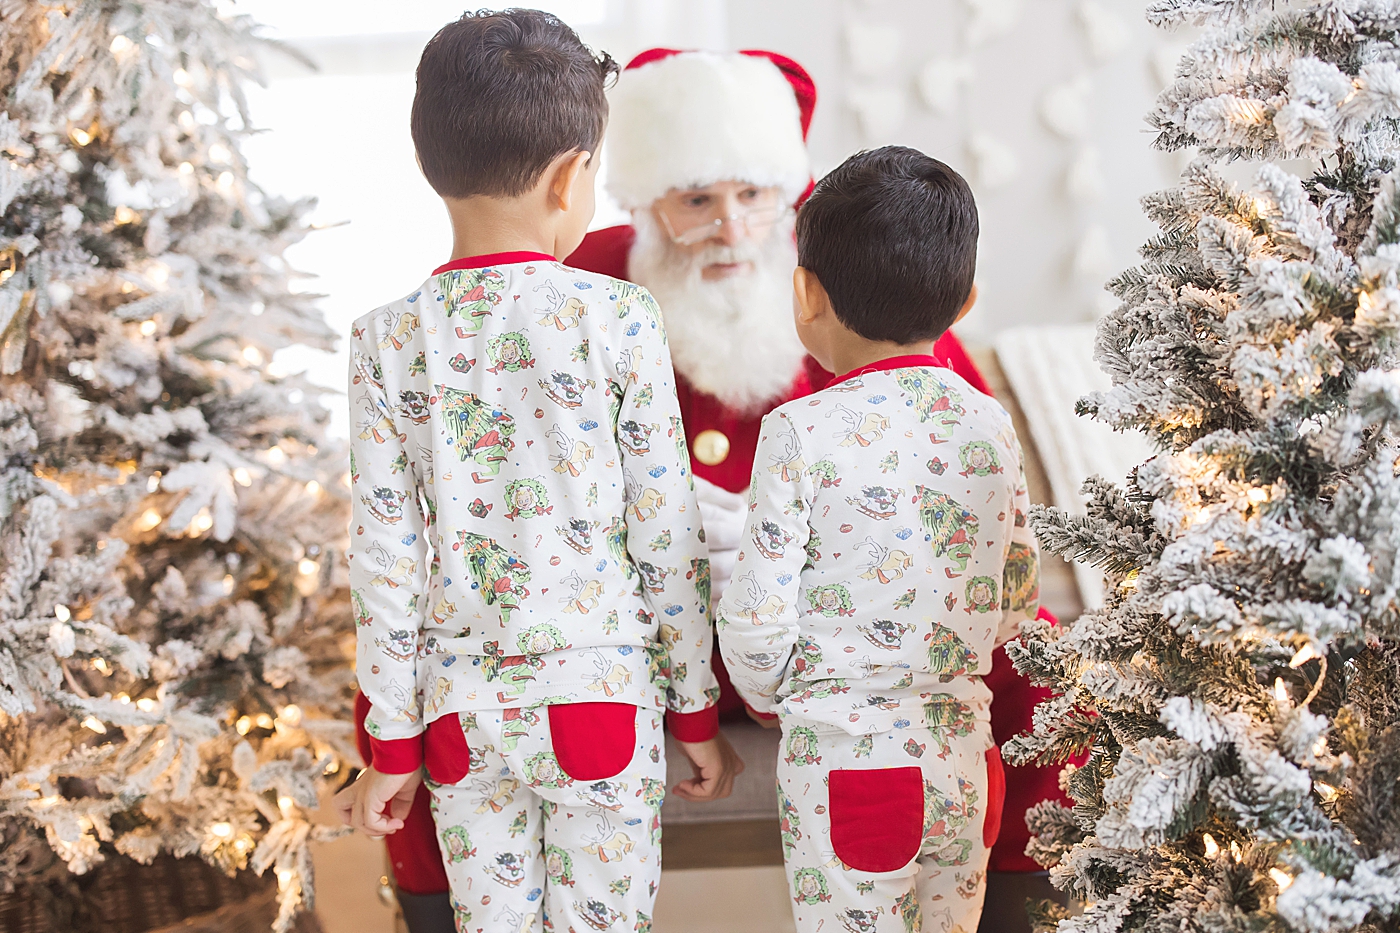 Kids visiting Santa in Christmas jammies. Photo by Fresh Light Photography.